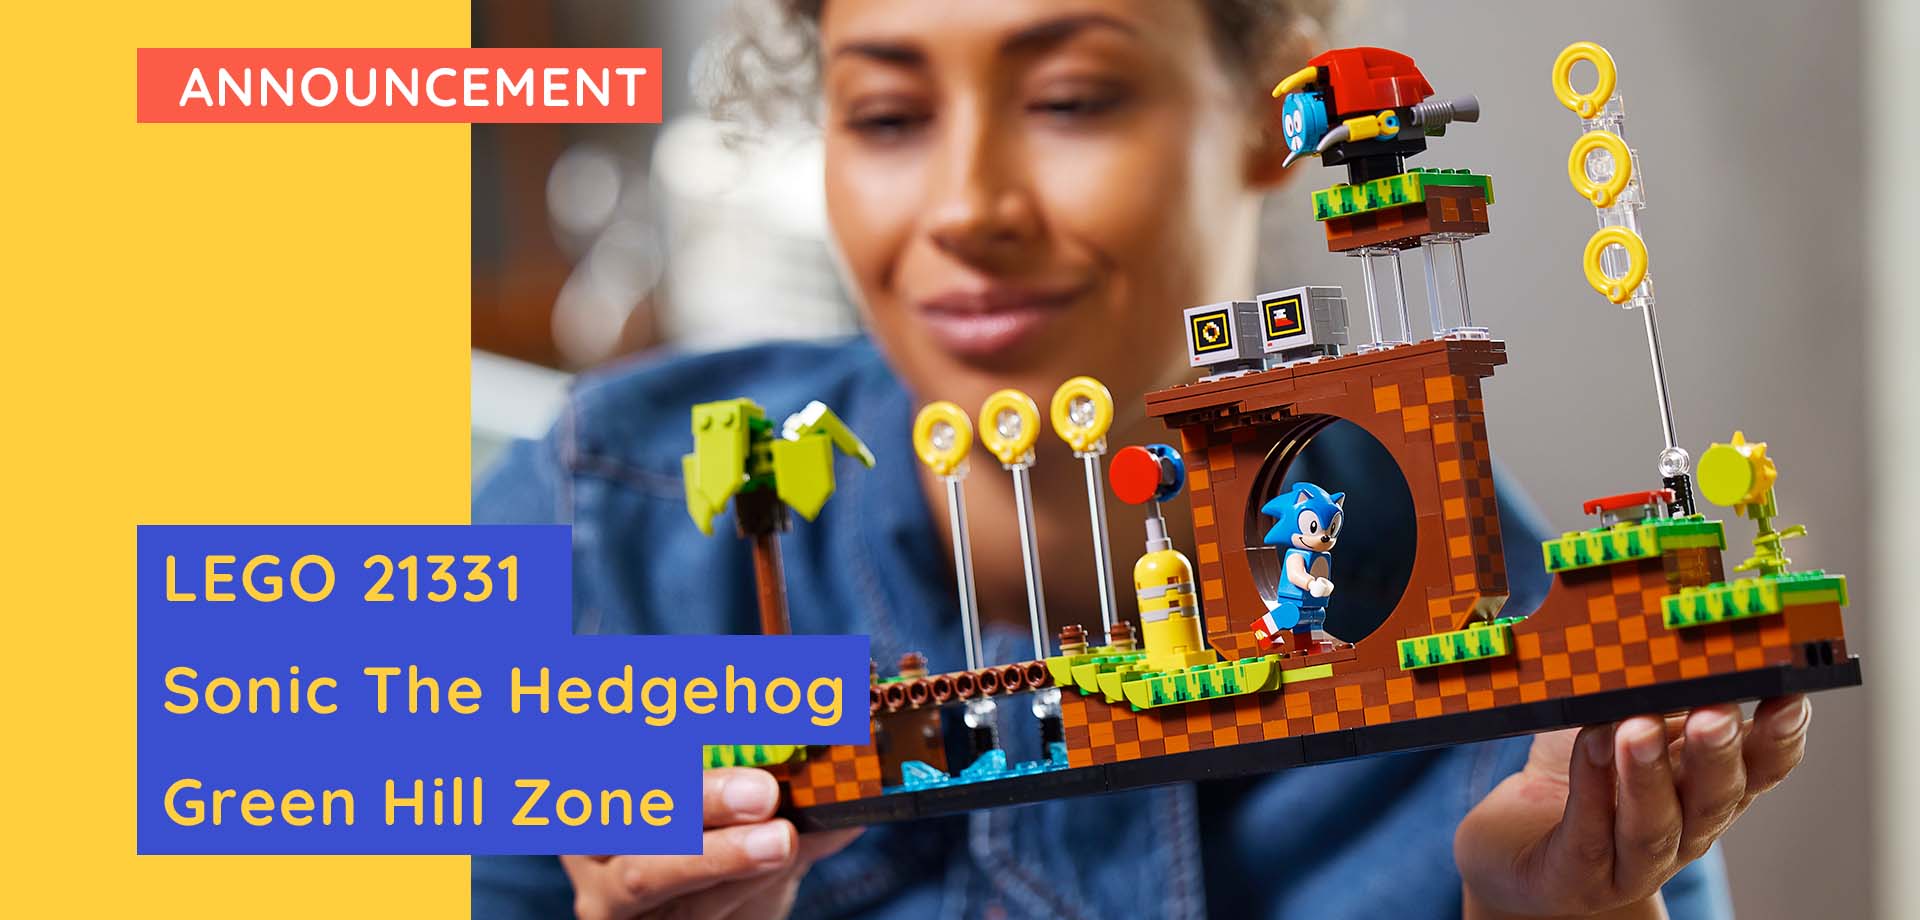 Ring In The New Year With Brand New SONIC THE HEDGEHOG LEGO Set